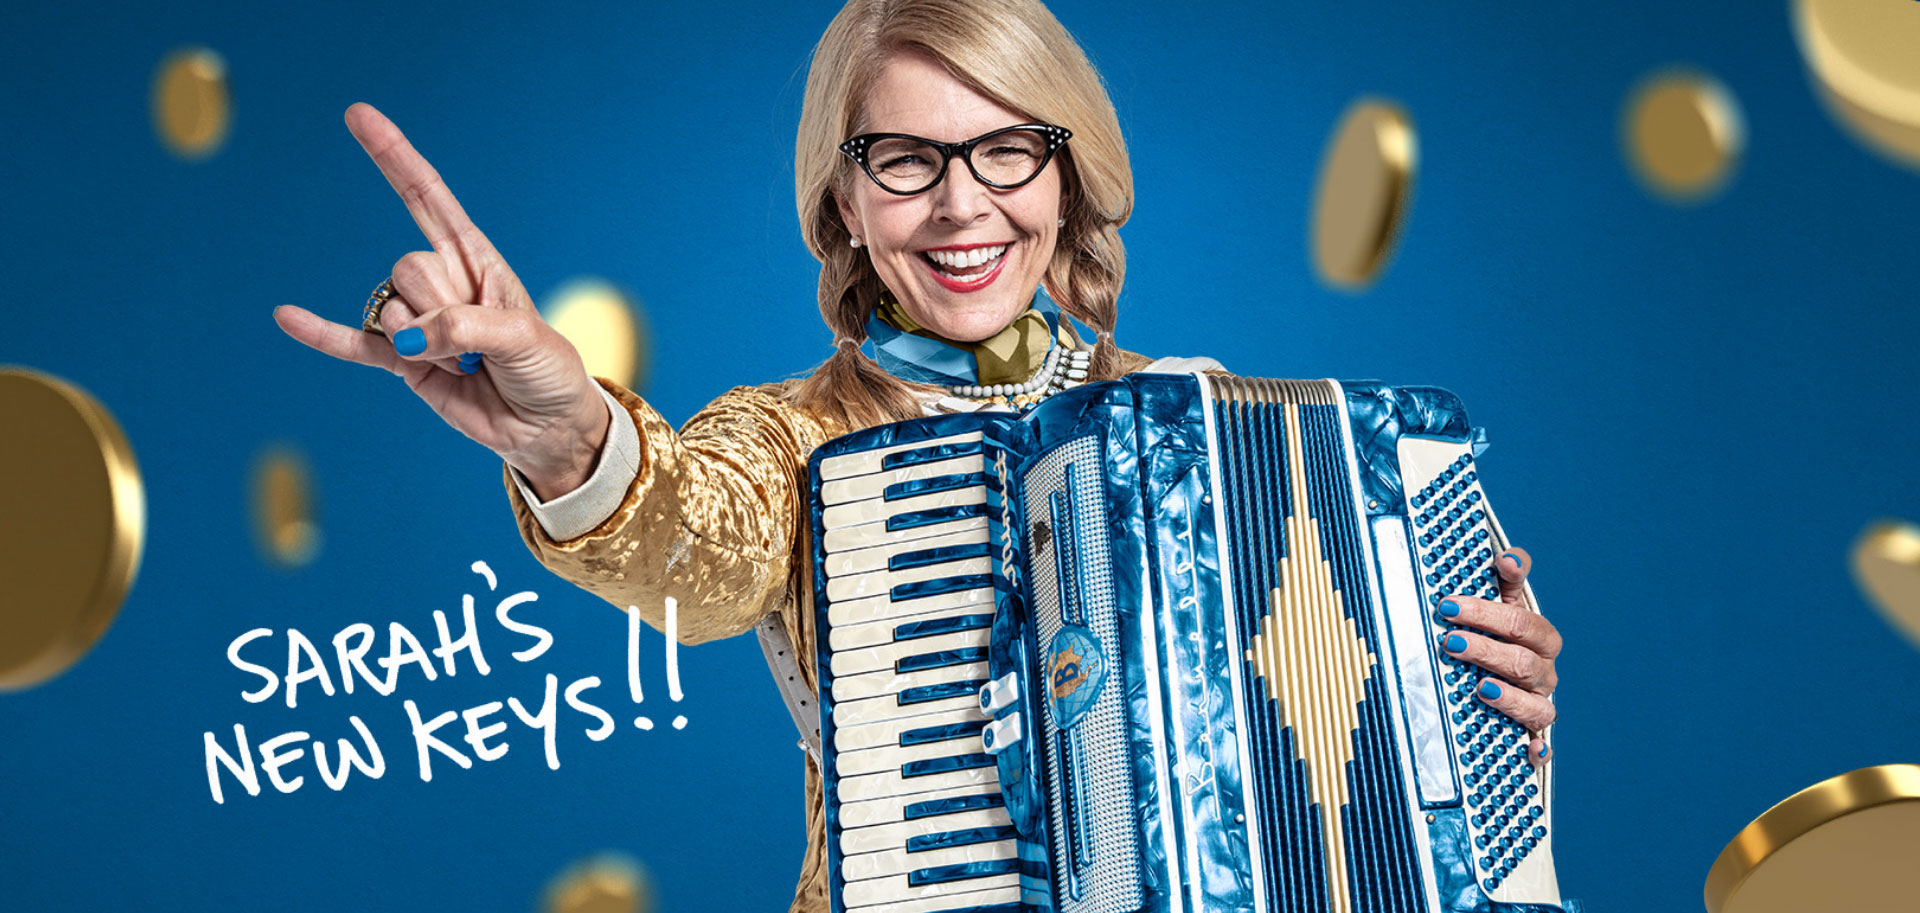 Grand Casino ad with woman holding accordion.